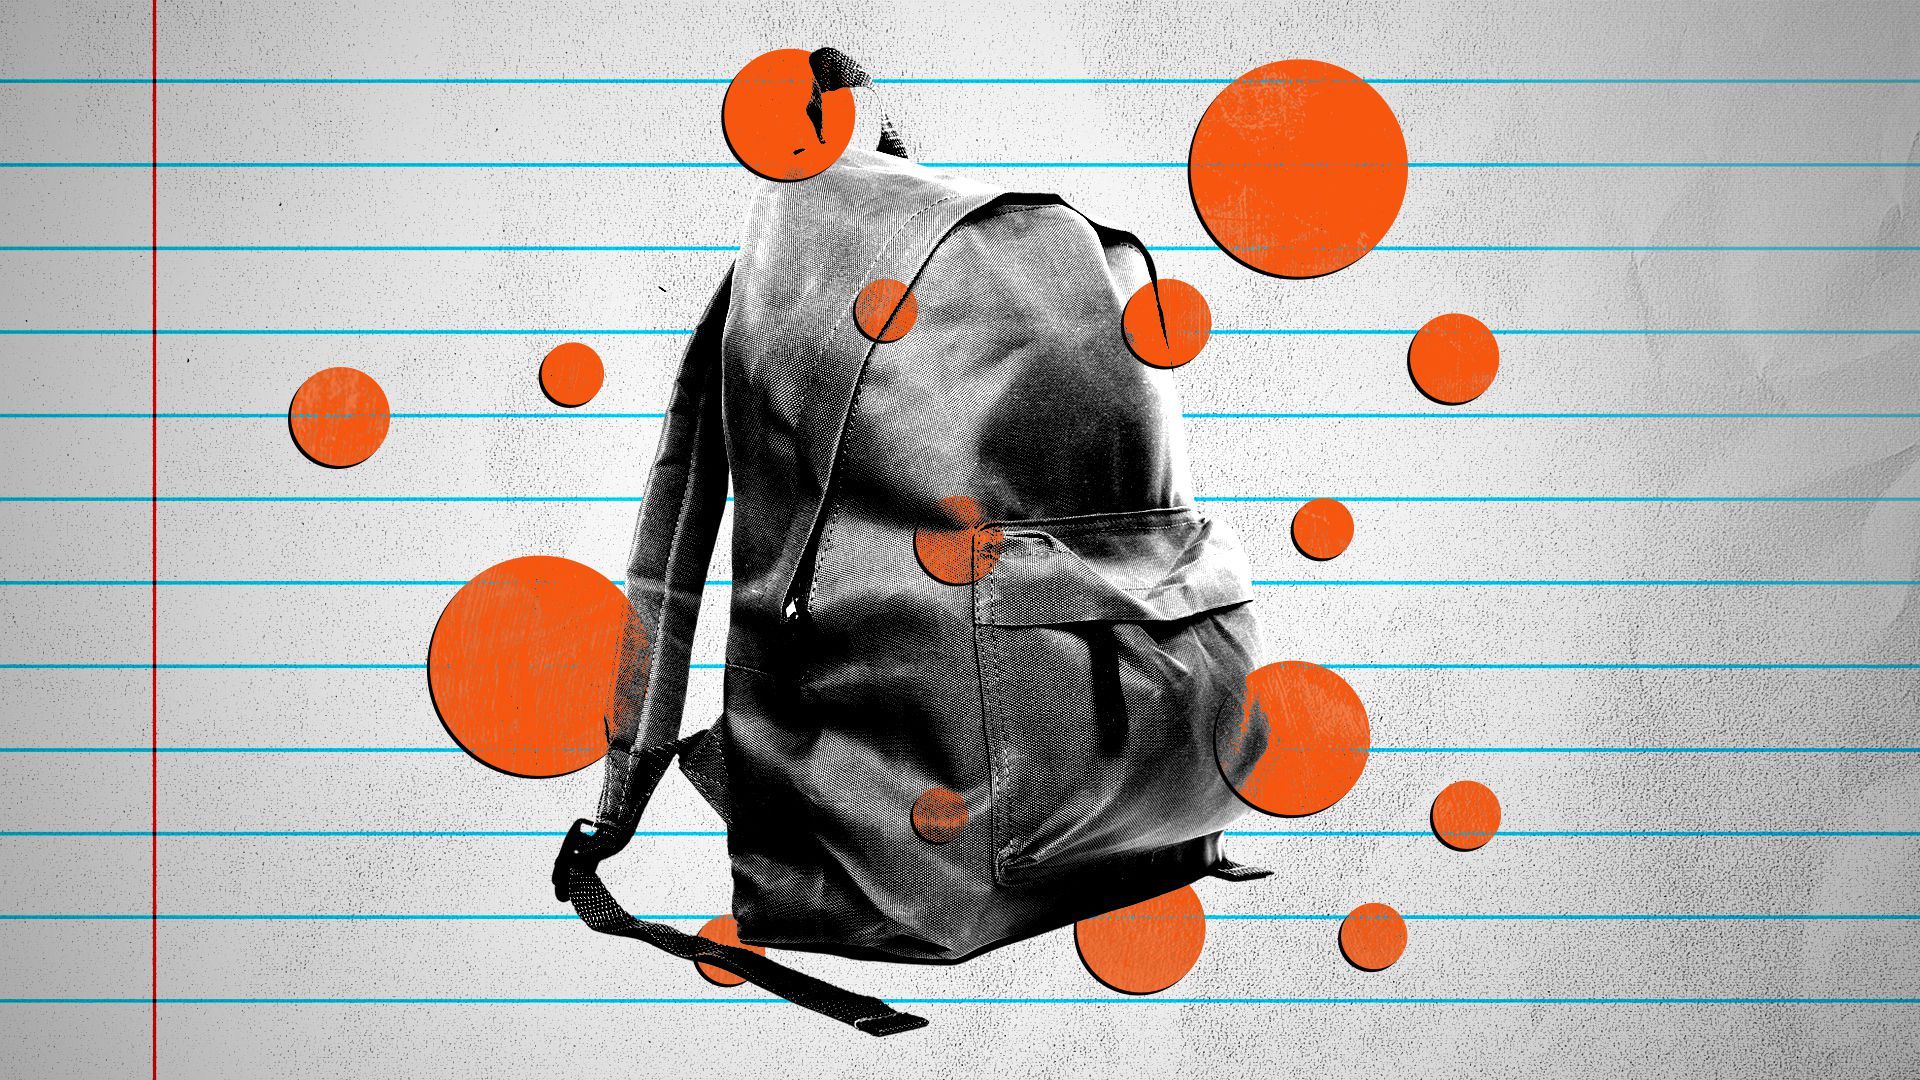 Illustration of a backpack on a background of college ruled paper, surrounded by dots.